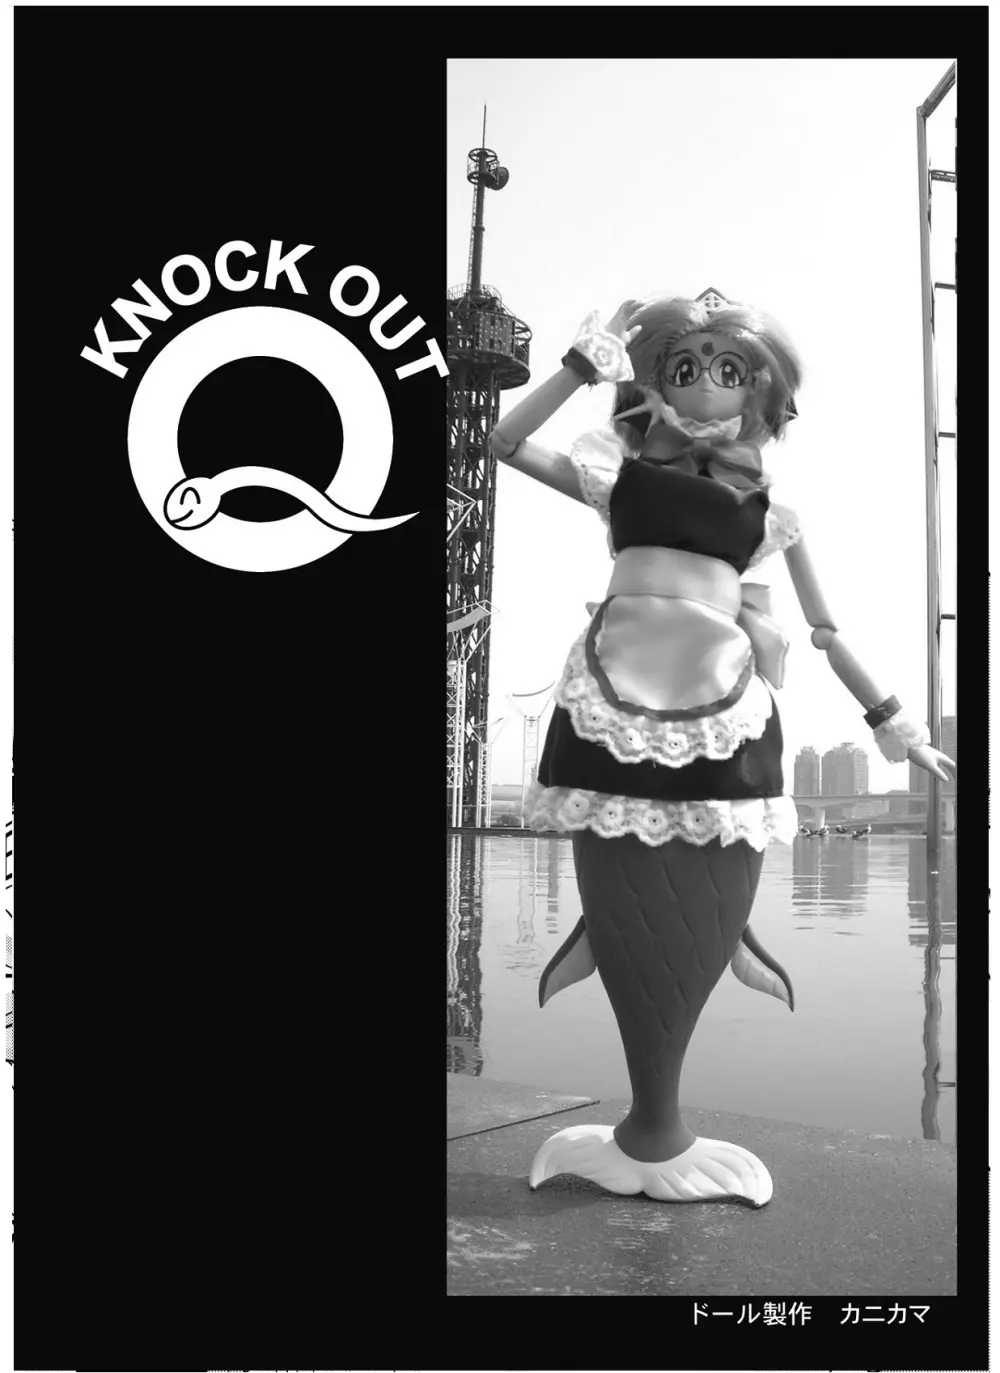 Knockout-Q 15ページ